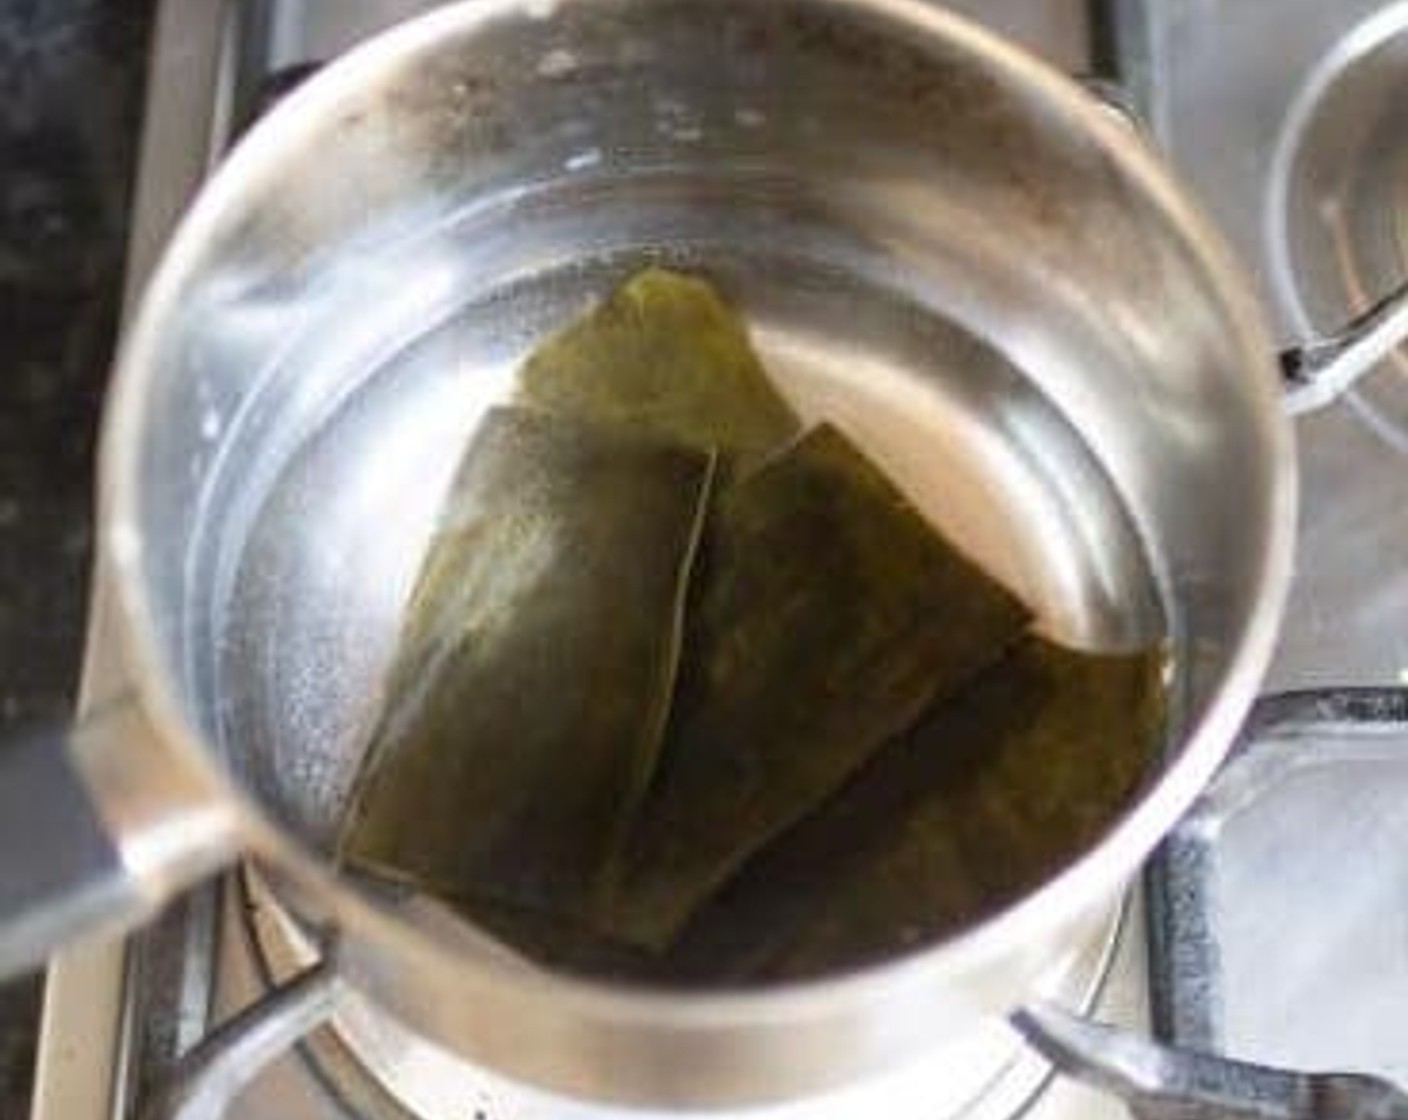 step 1 Heat Water (3/4 cup) in a medium-sized saucepan on high heat until it starts to boil. Add in the Kombu (1 Tbsp) and reduce to medium-low heat. Cover the pan with a lid and simmer for 10 minutes.